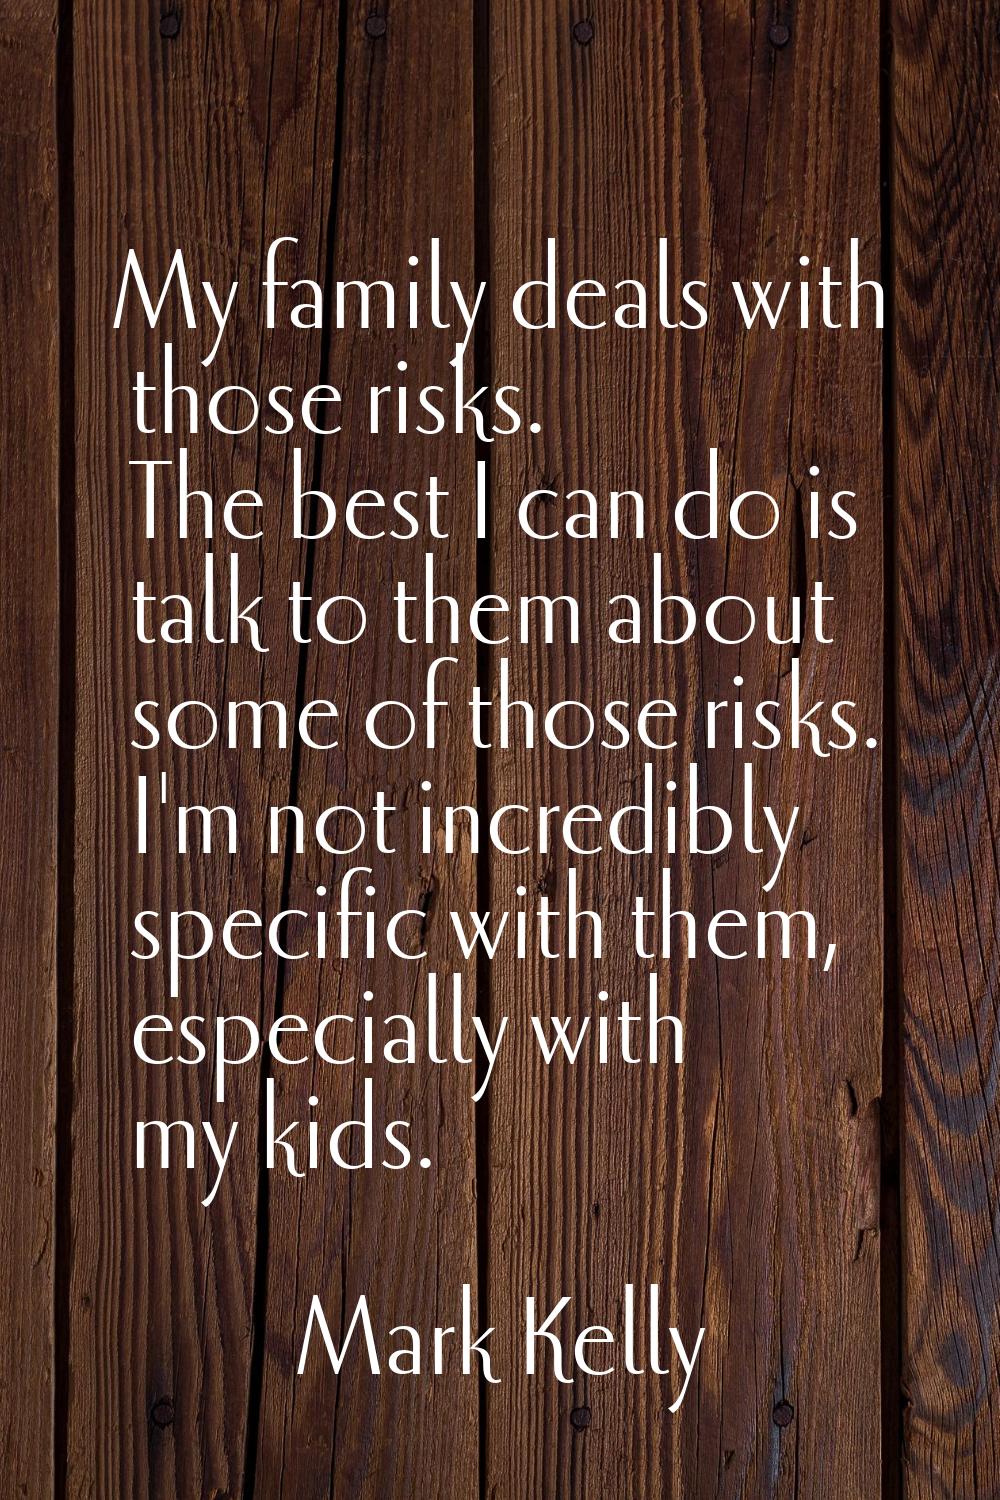 My family deals with those risks. The best I can do is talk to them about some of those risks. I'm 